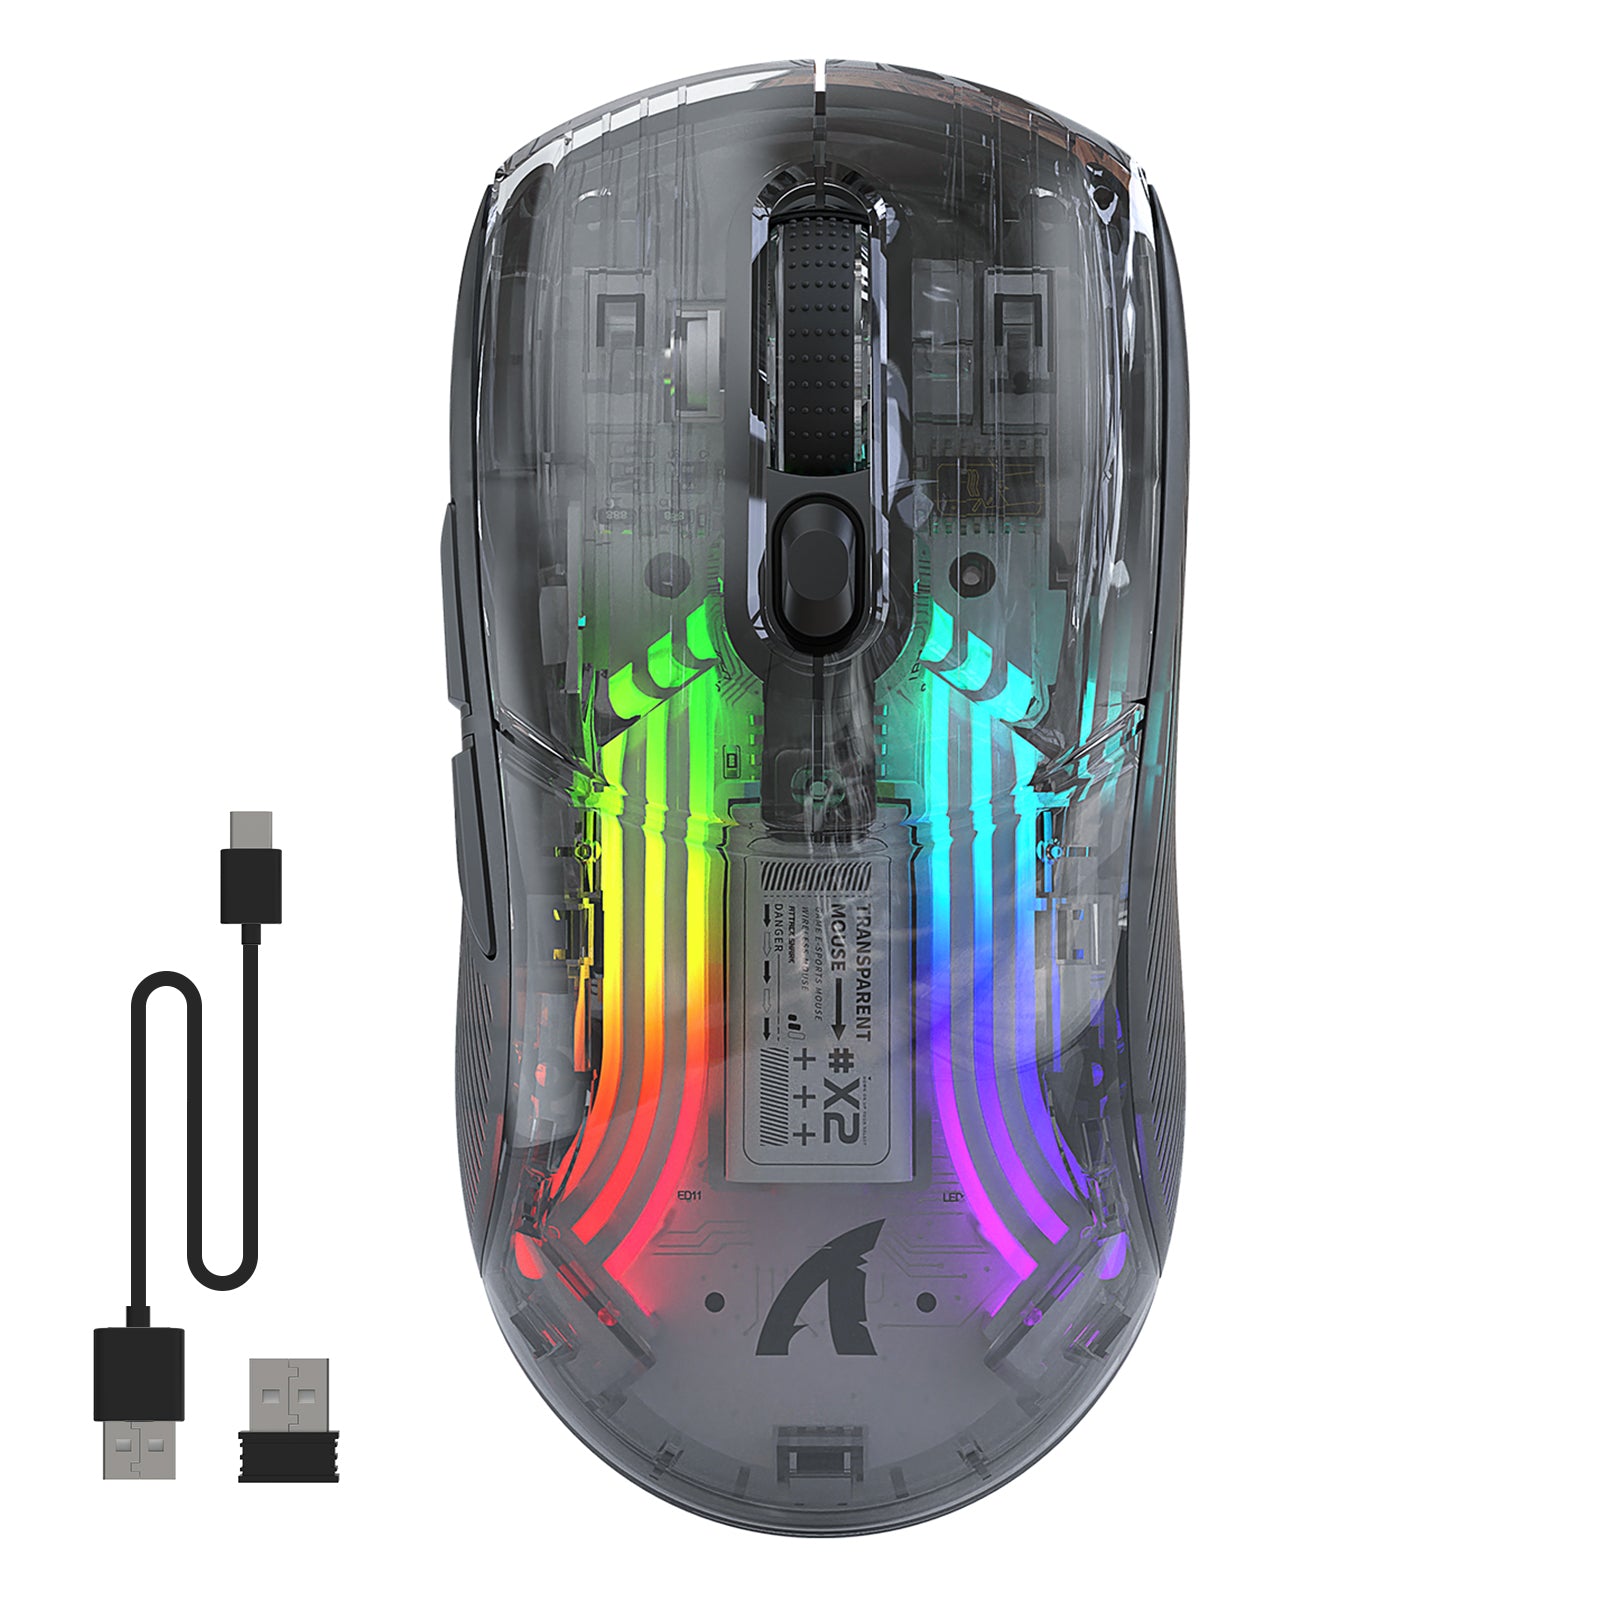 Attack Shark X3 Tri Mdoe Mouse Bluetooth Wireless Gaming Mouse